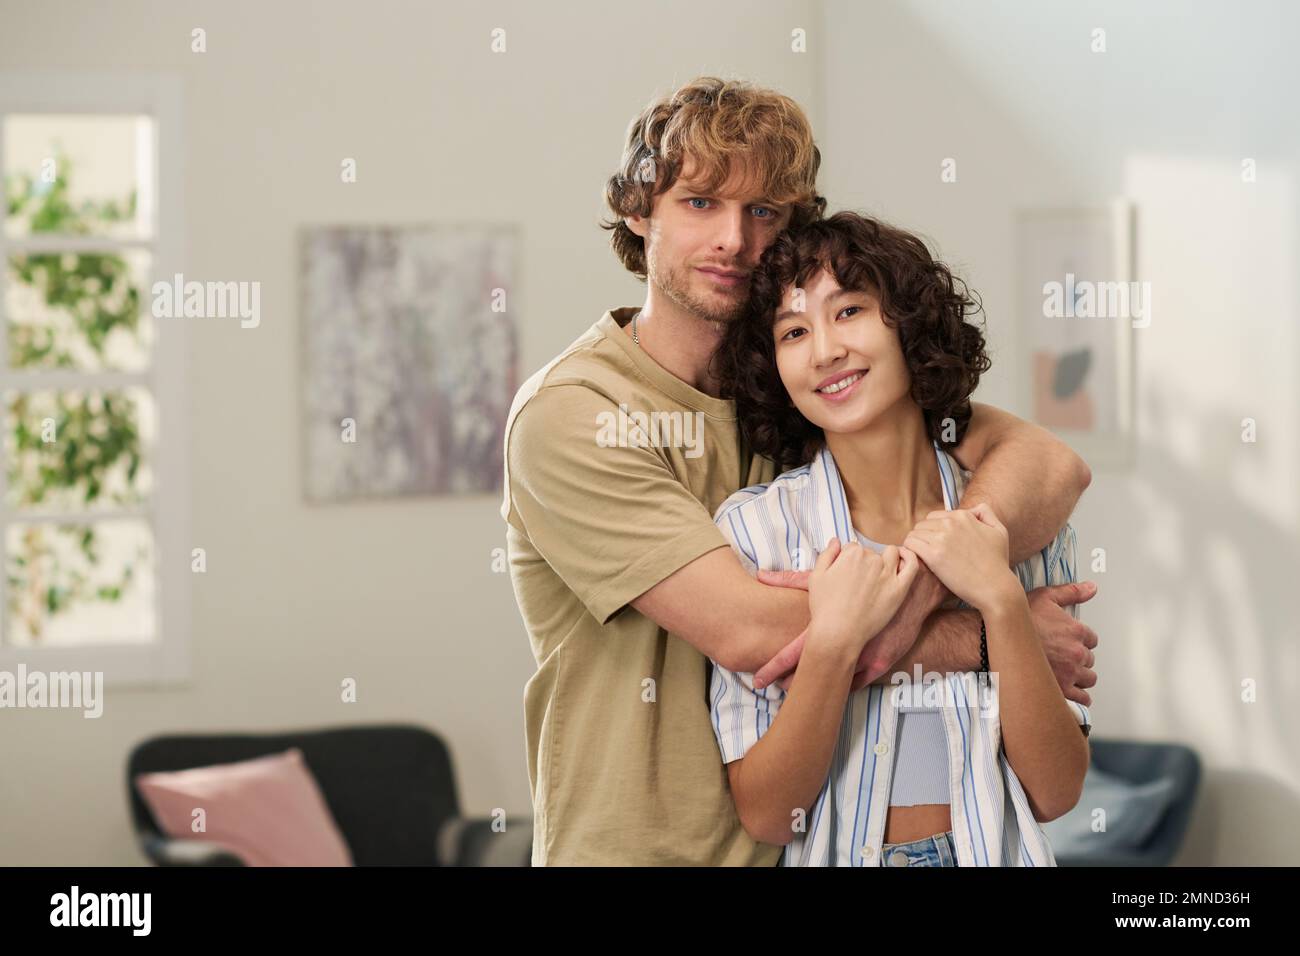 Happy young brunette woman in casualwear enjoying embrace of her husband while both standing in living room and looking at camera Stock Photo